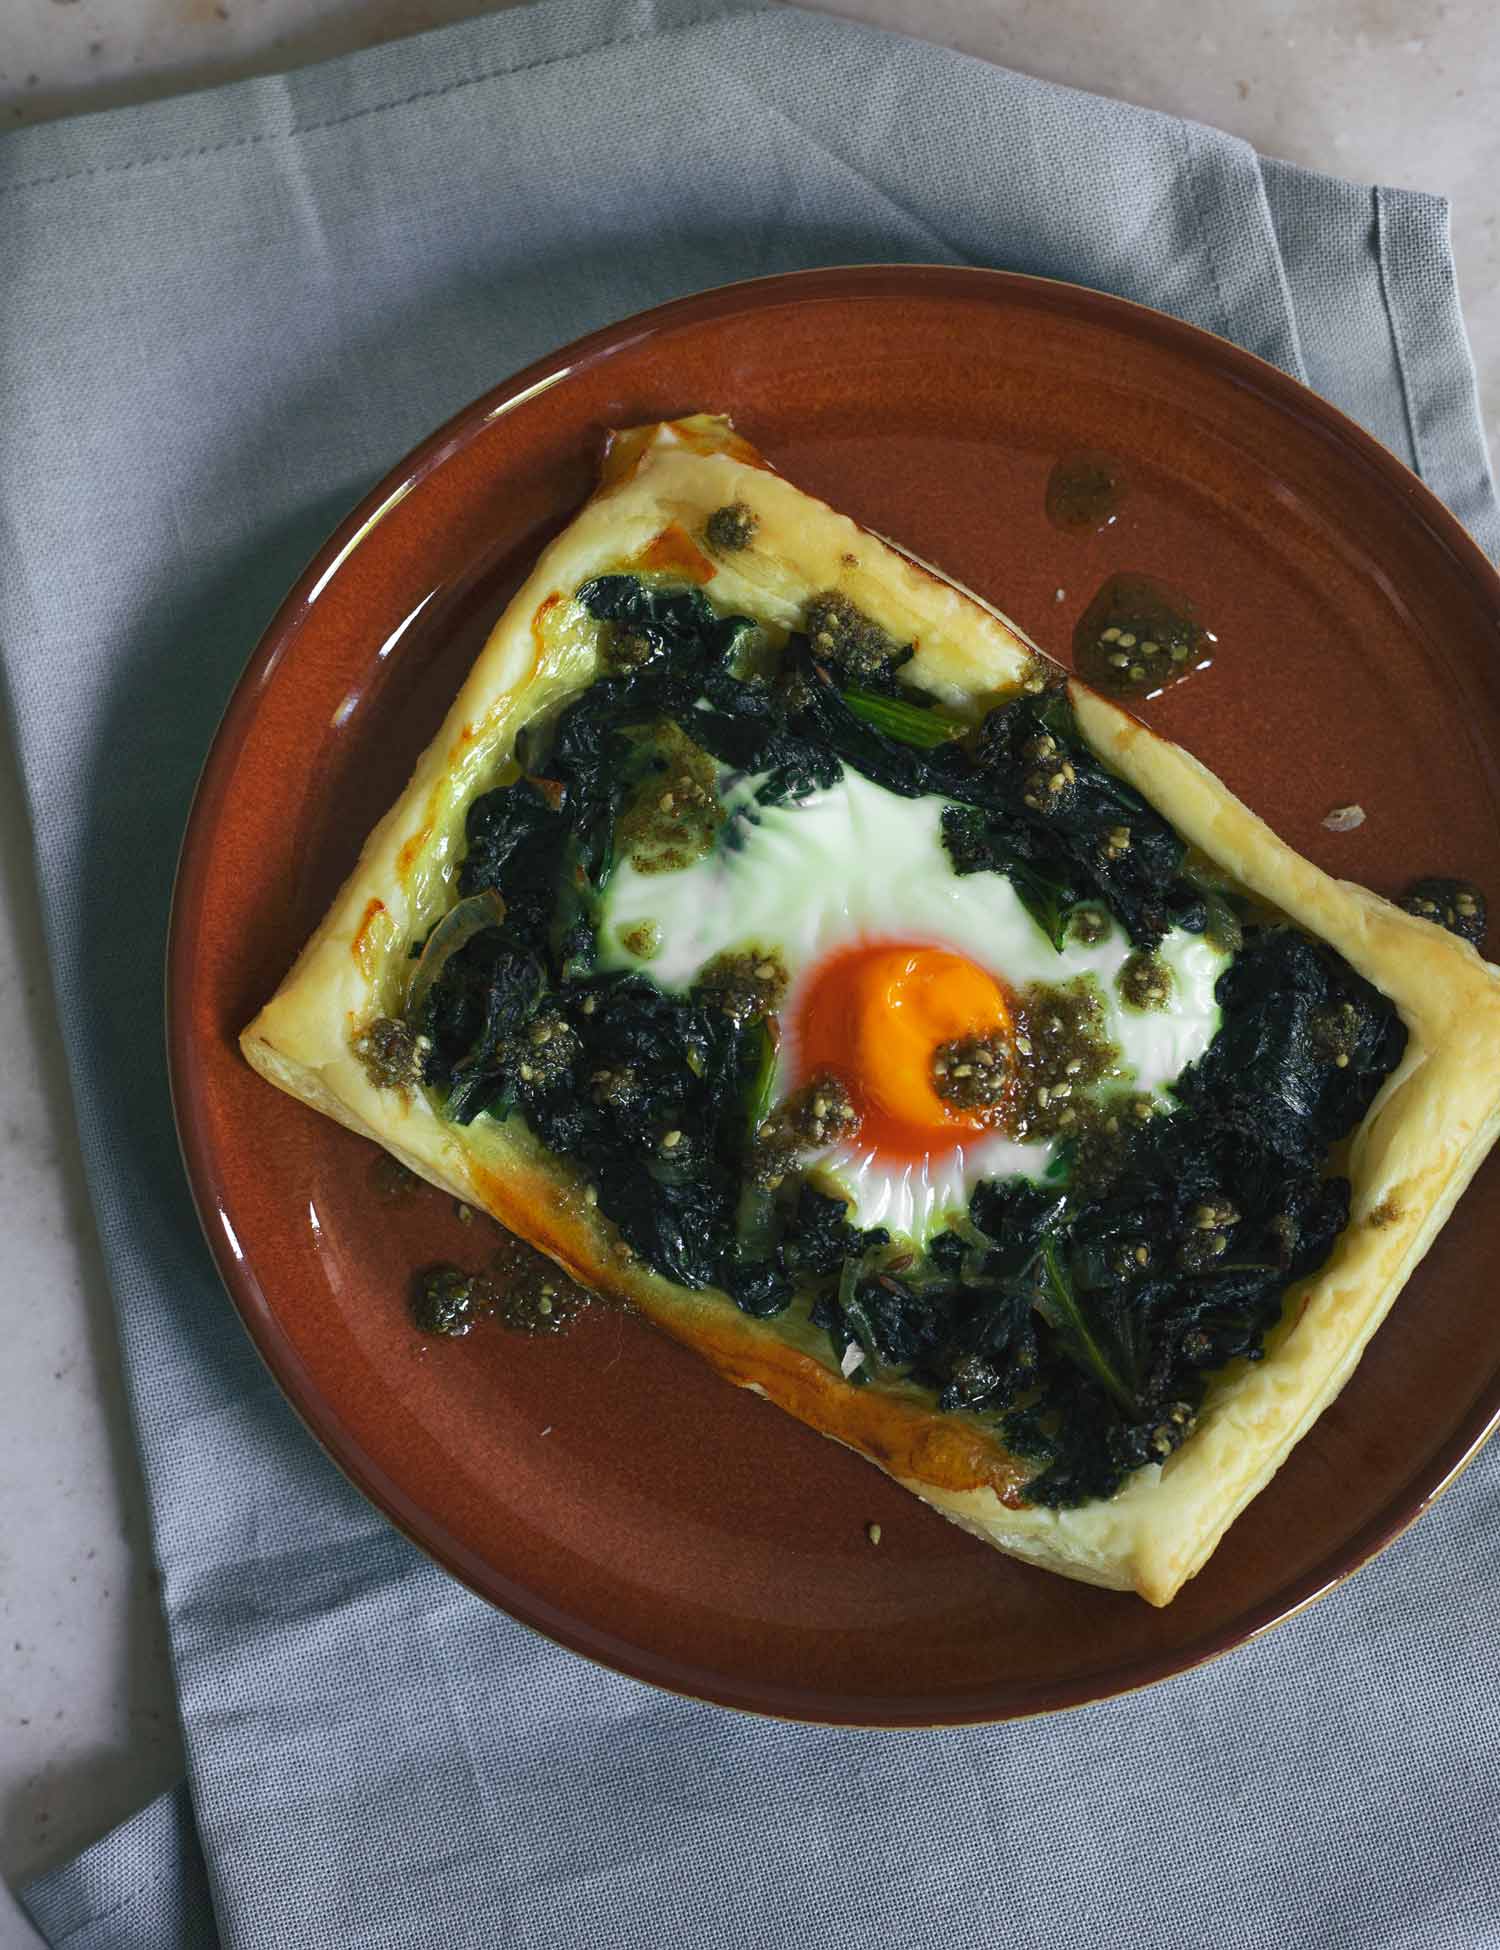 A pastry tart with greens and eggs on a red plate